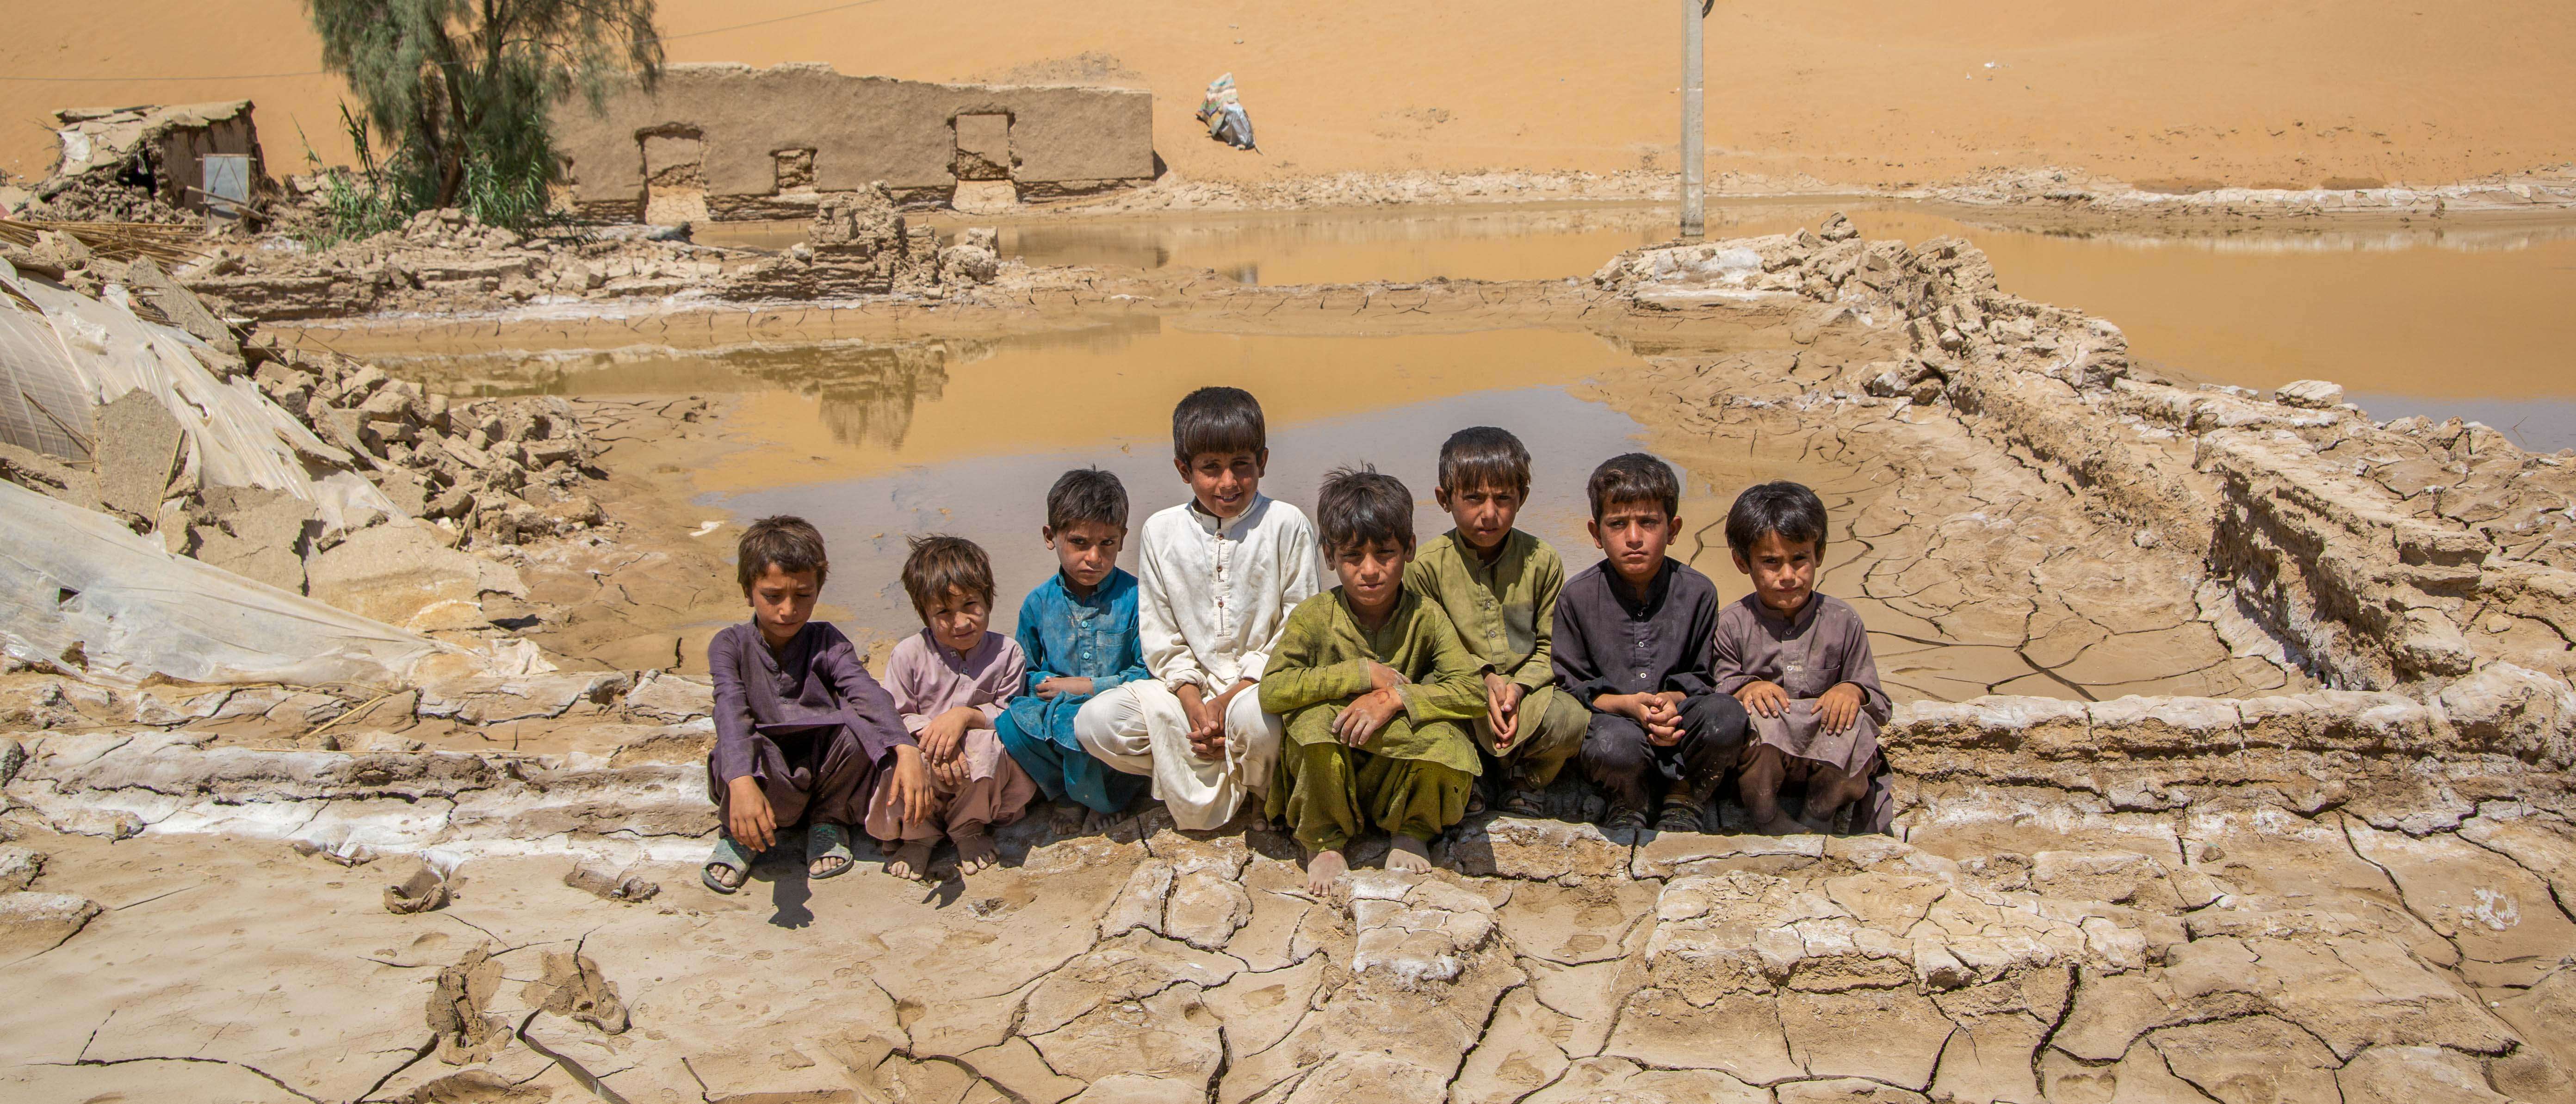 8 boys sit together outside in Pakistan, in front of a landscape devastated by flooding.